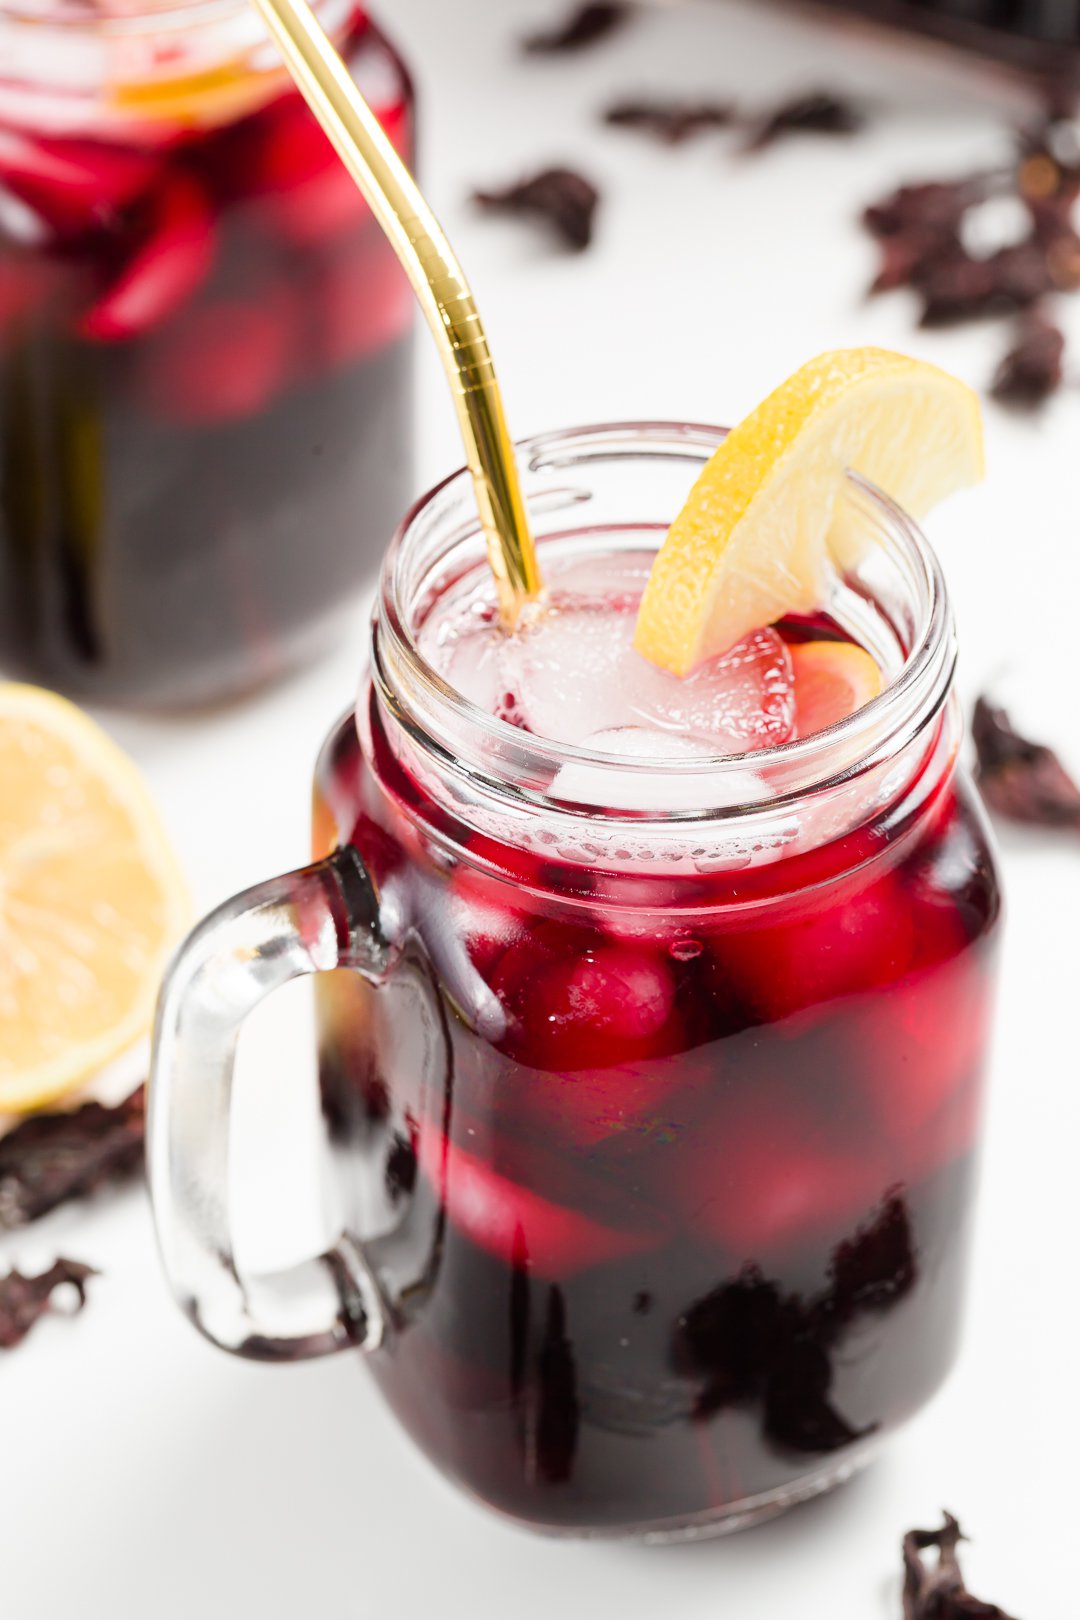 A glass of iced hibiscus tea garnished with lemon